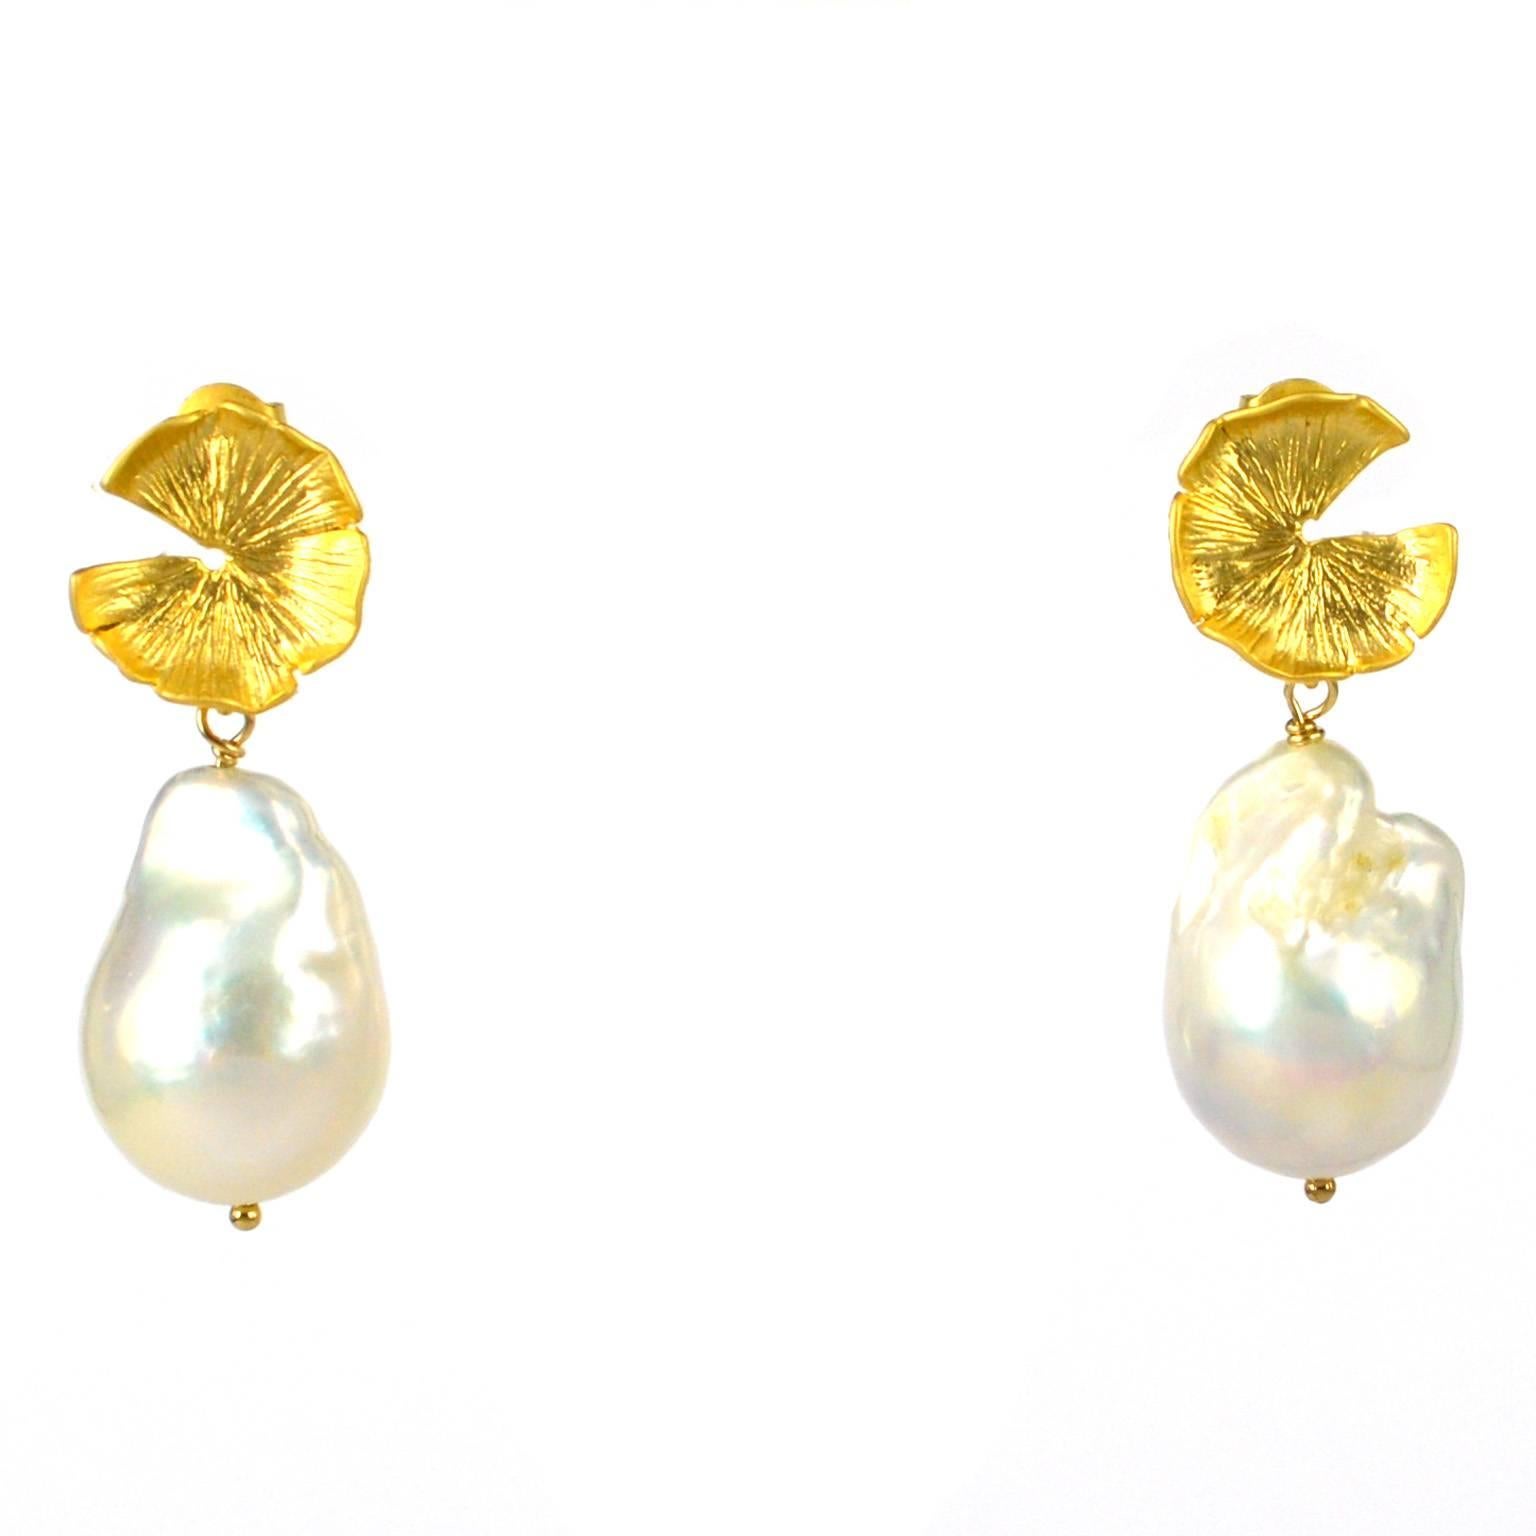 Contemporary Decadent Jewels Gold Baroque Pearl Earrings